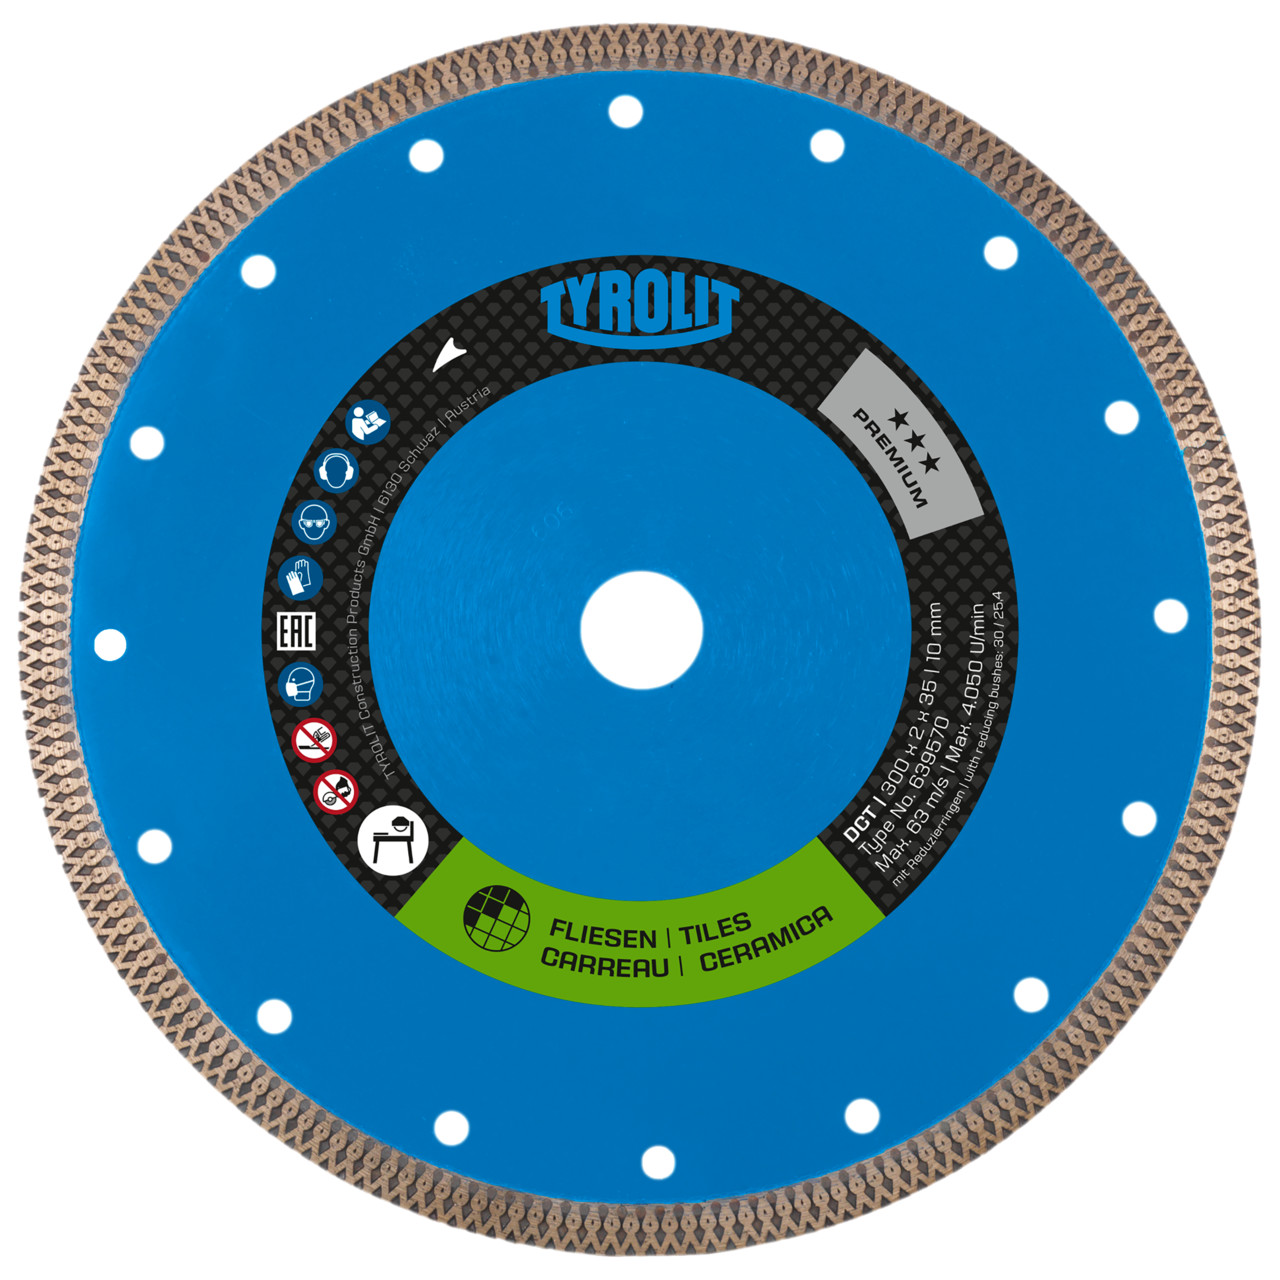 TYROLIT table saw blade DxTxH 300x2x35 DCT, shape: 1A1R (cut-off wheel with continuous cutting wheel), Art. 639570